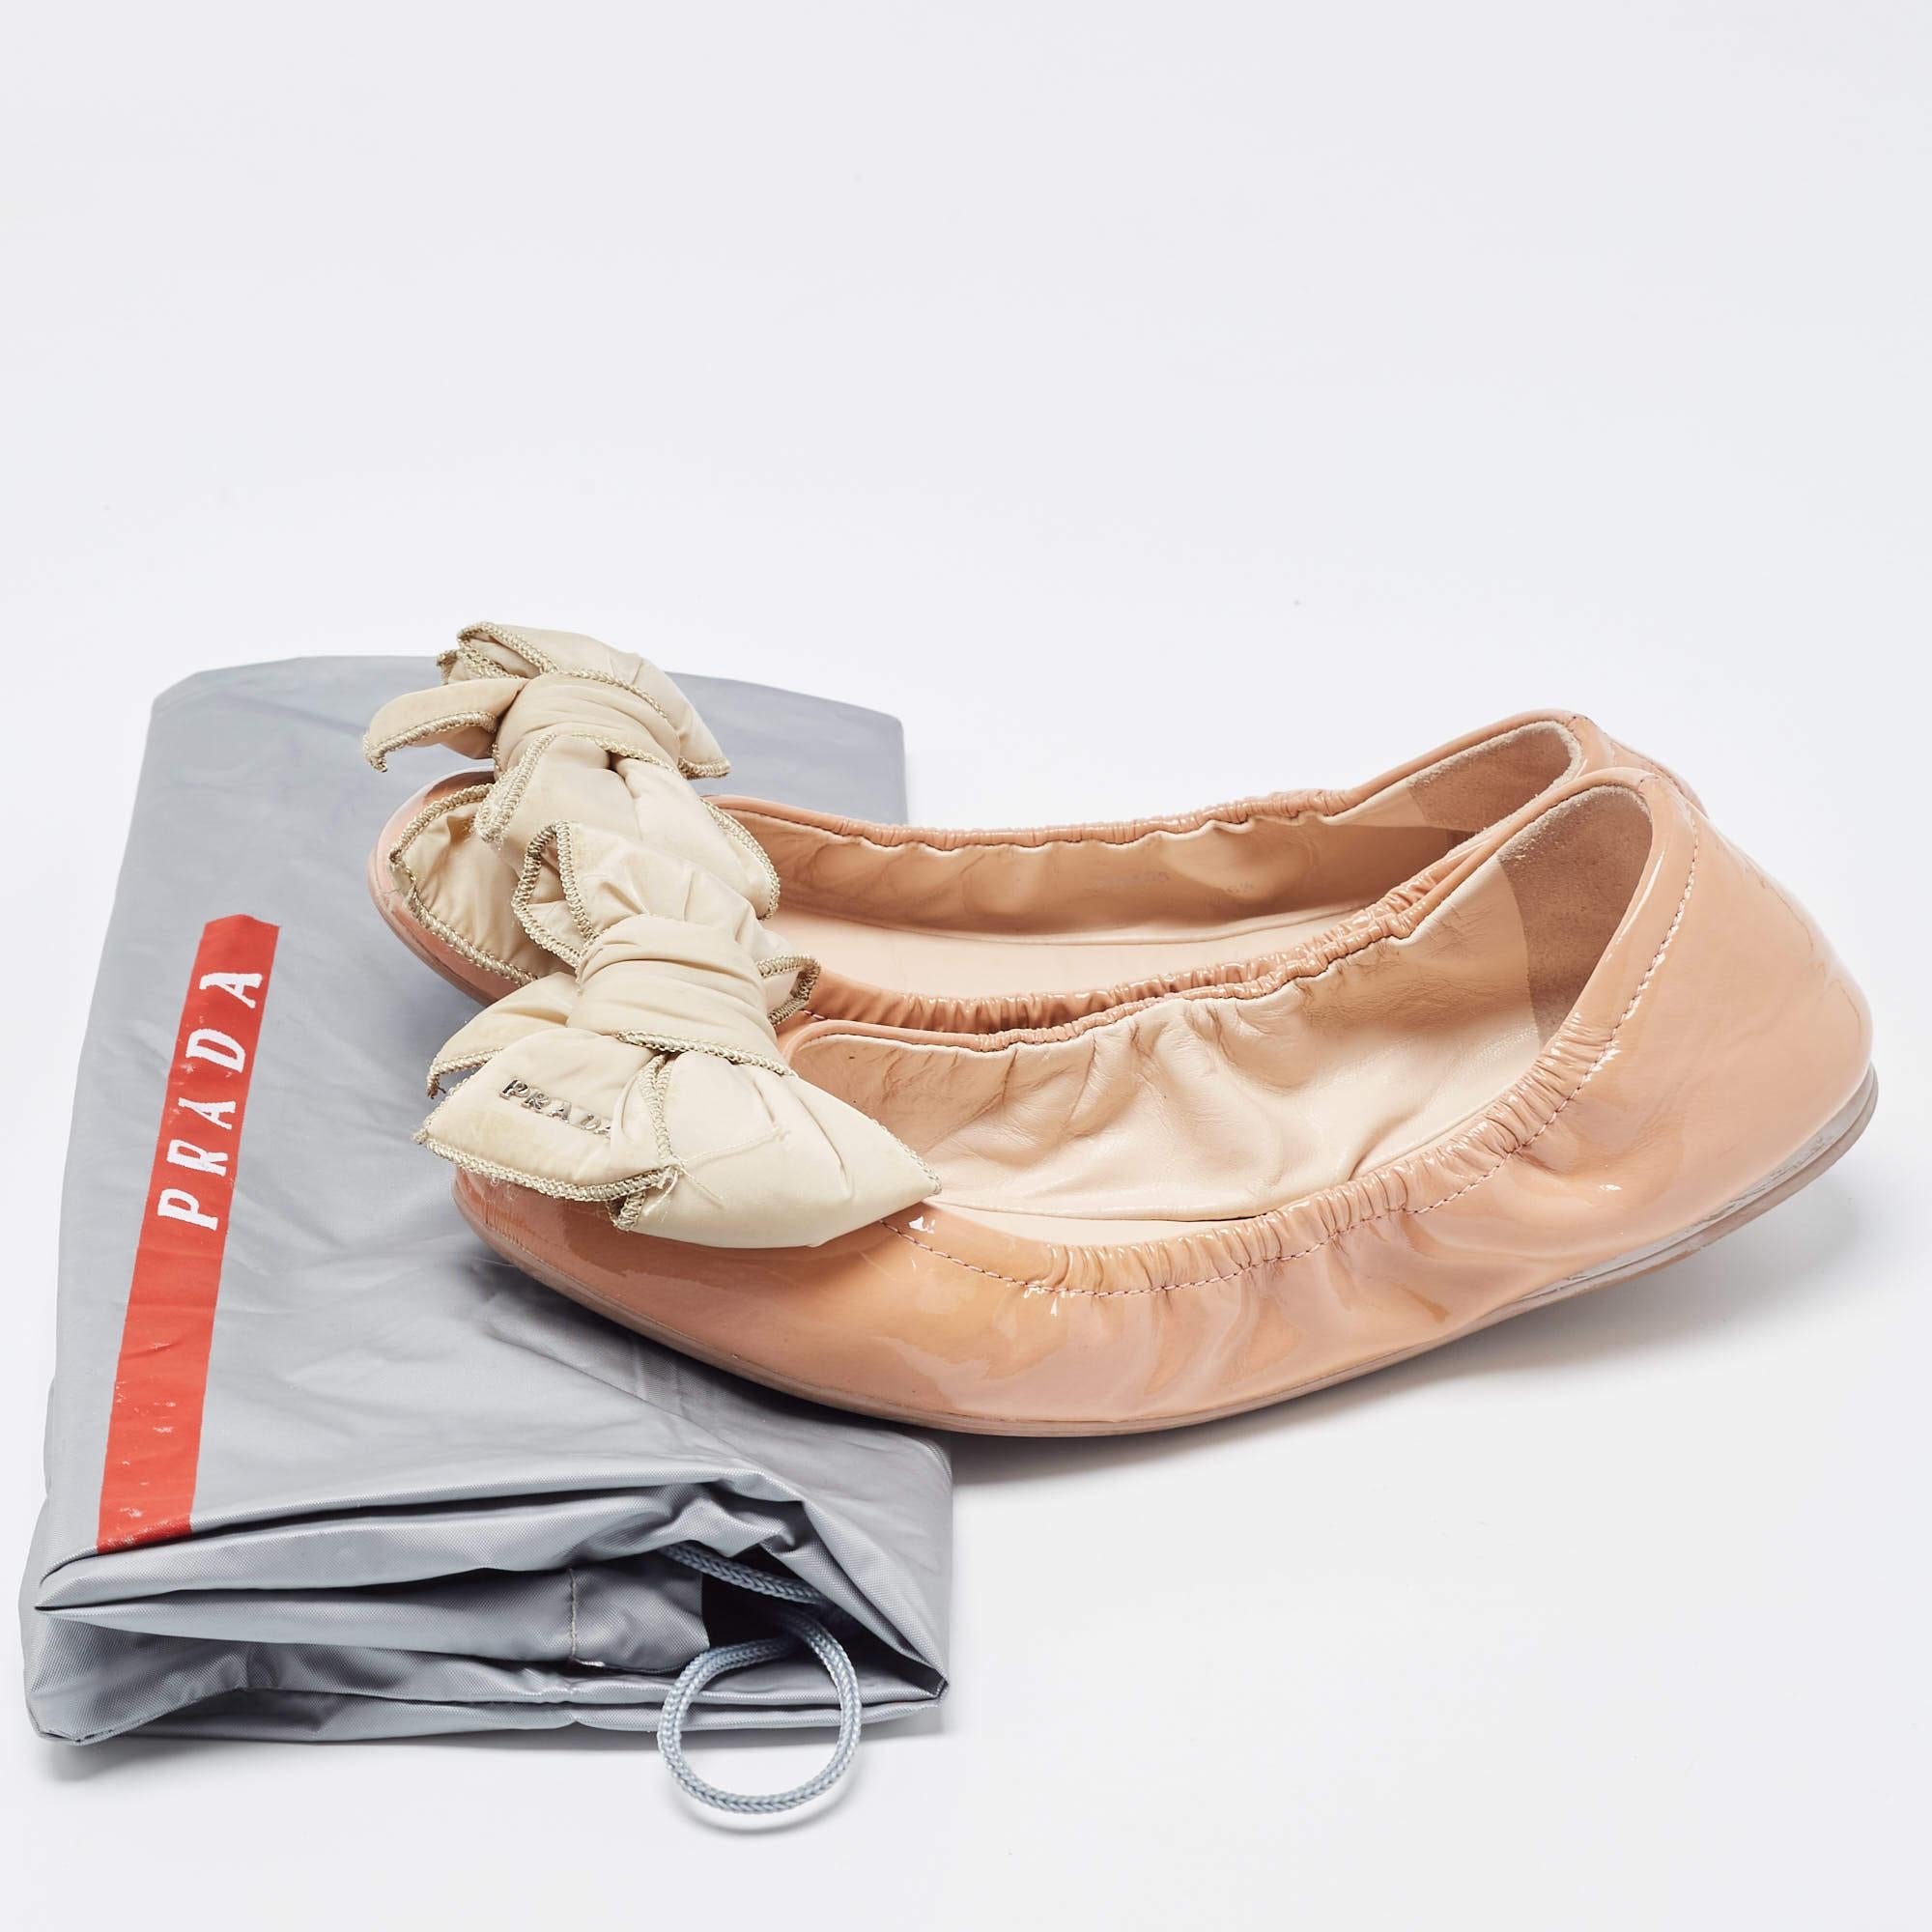 Prada Beige Patent Leather Bow Scrunch Ballet Flats Size 36.5 For Sale 3